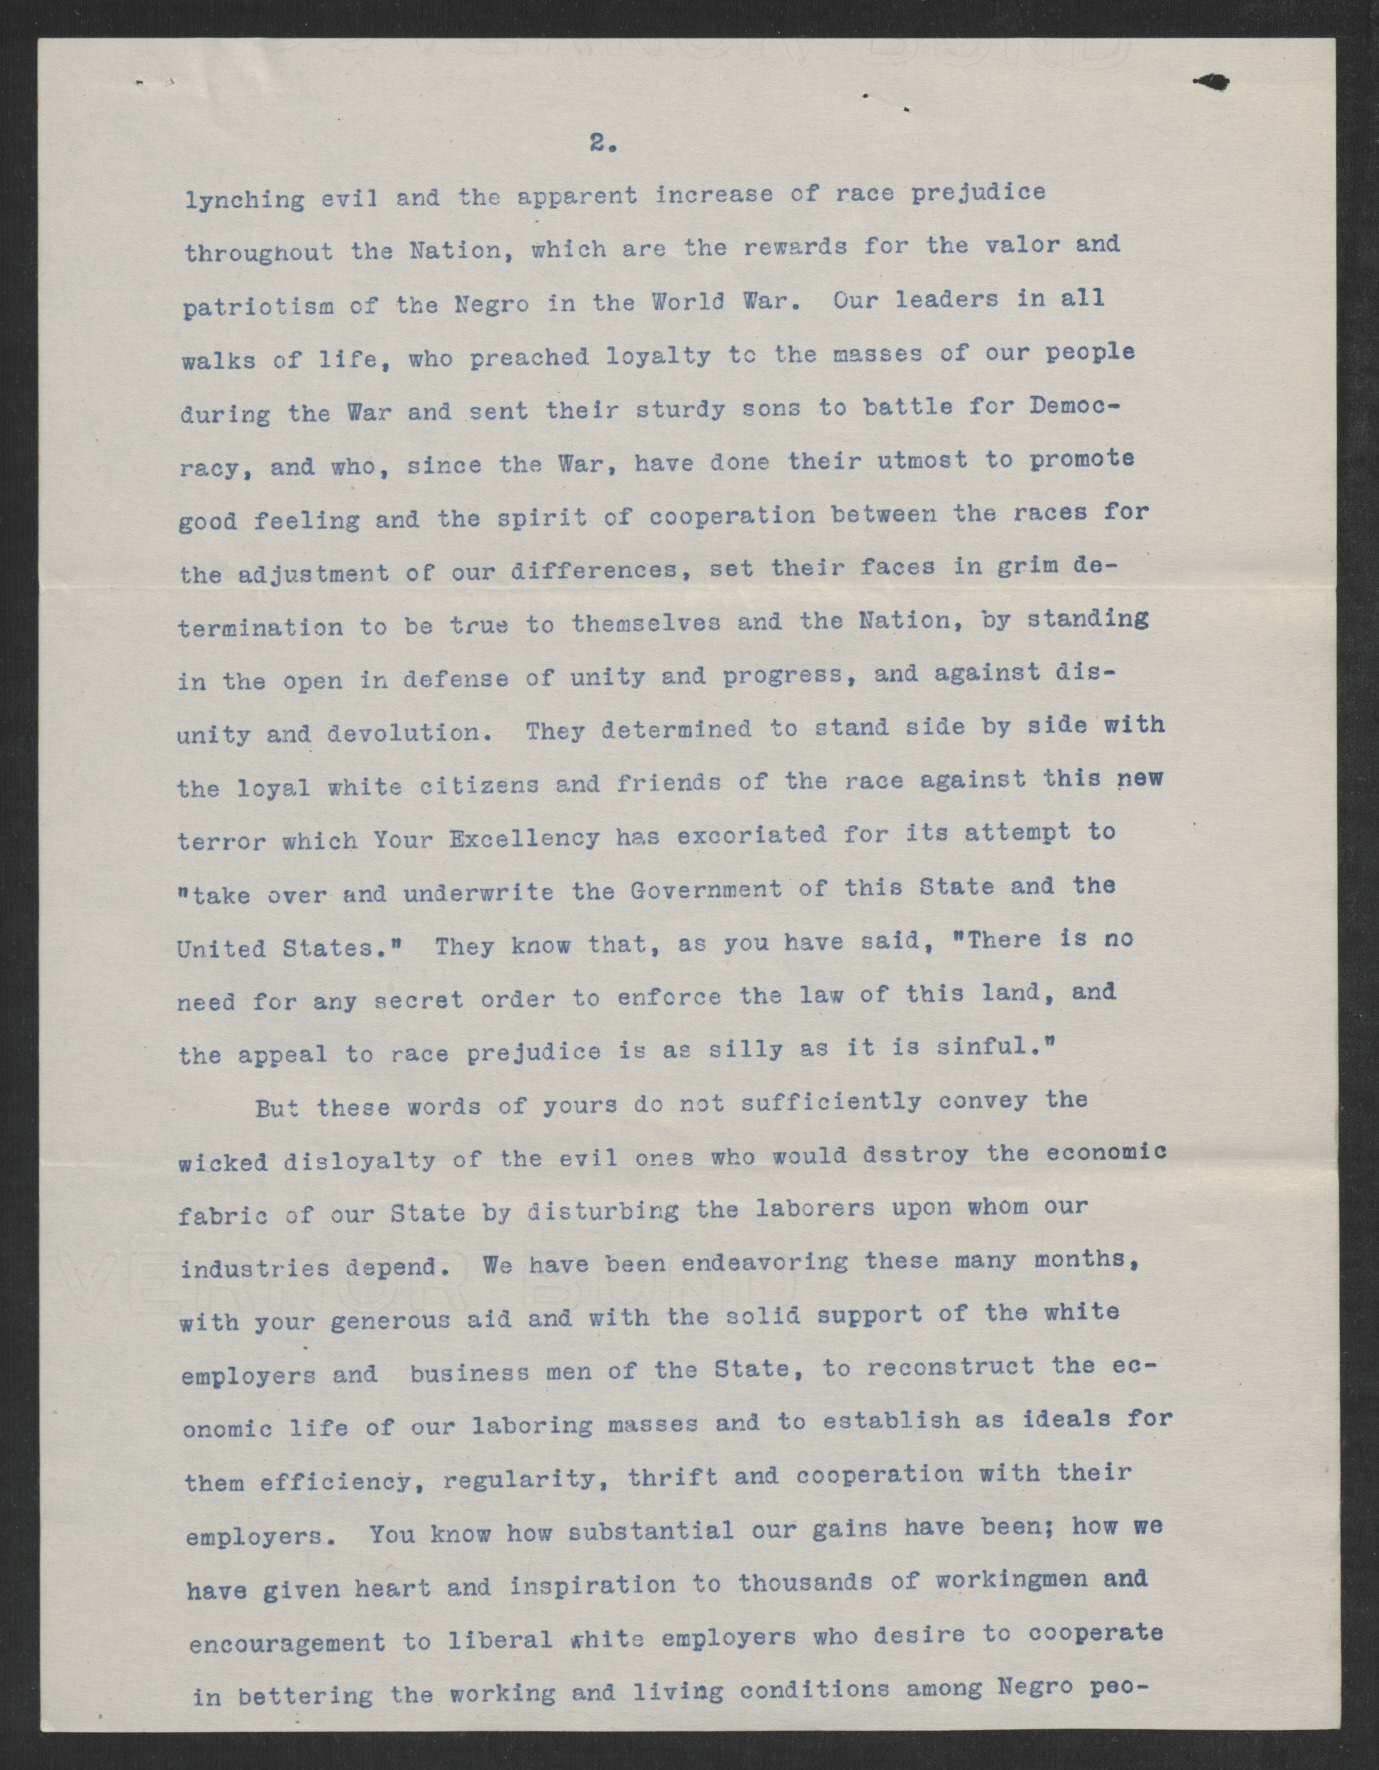 A Memorial of Thanks to Governor T. W. Bickett from the Citizens of Lexington, N.C., ca. July 1919, page 2